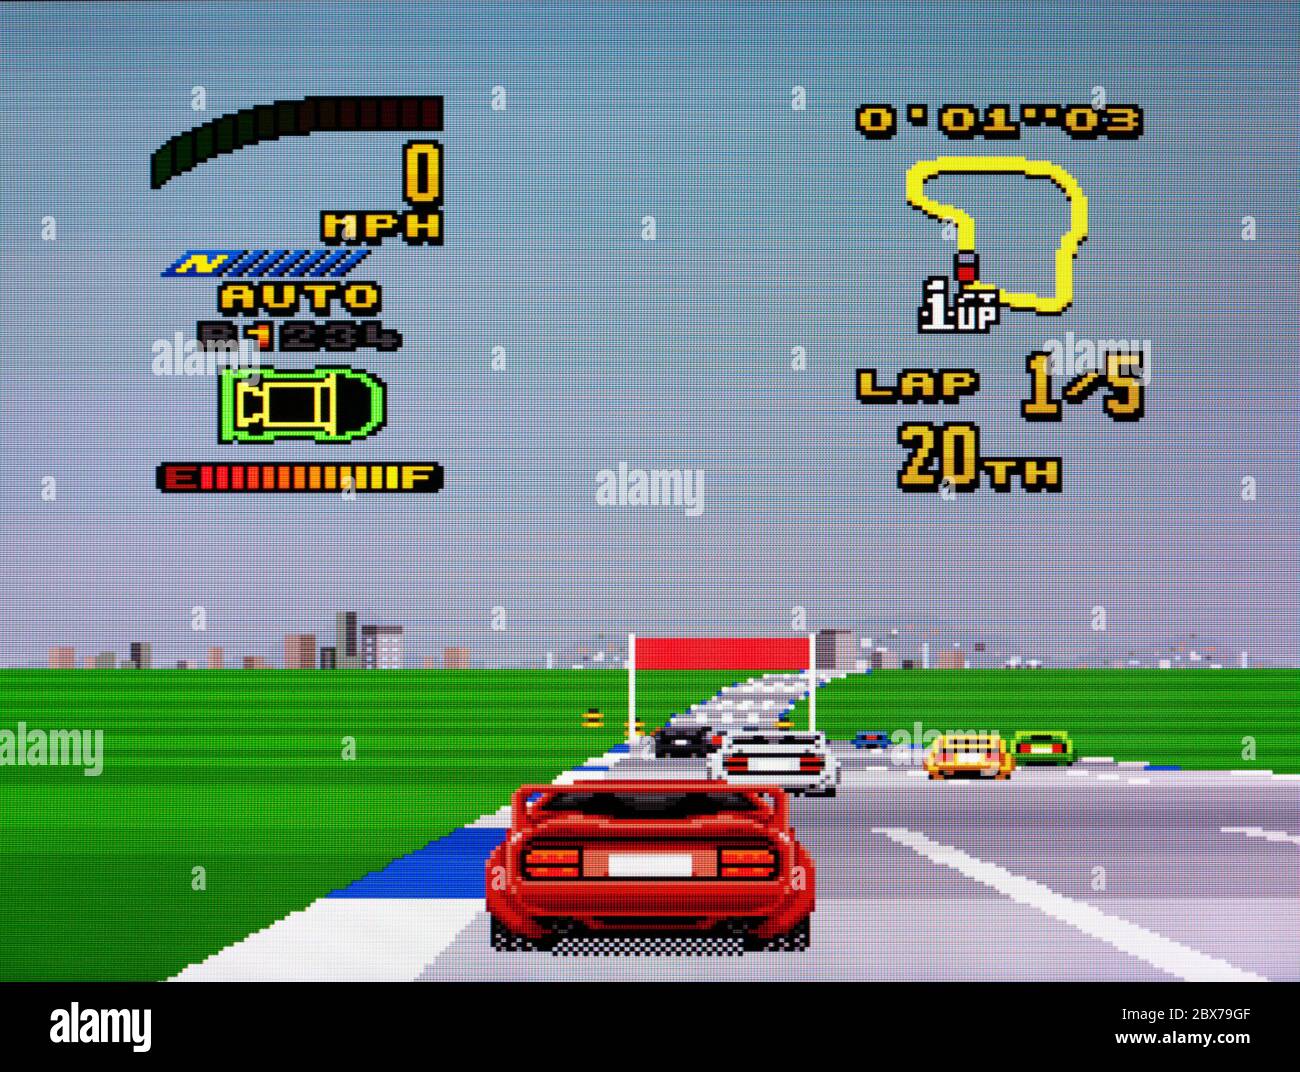 Top Gear 2 - SNES Super Nintendo - Editorial use only Stock Photo - Alamy